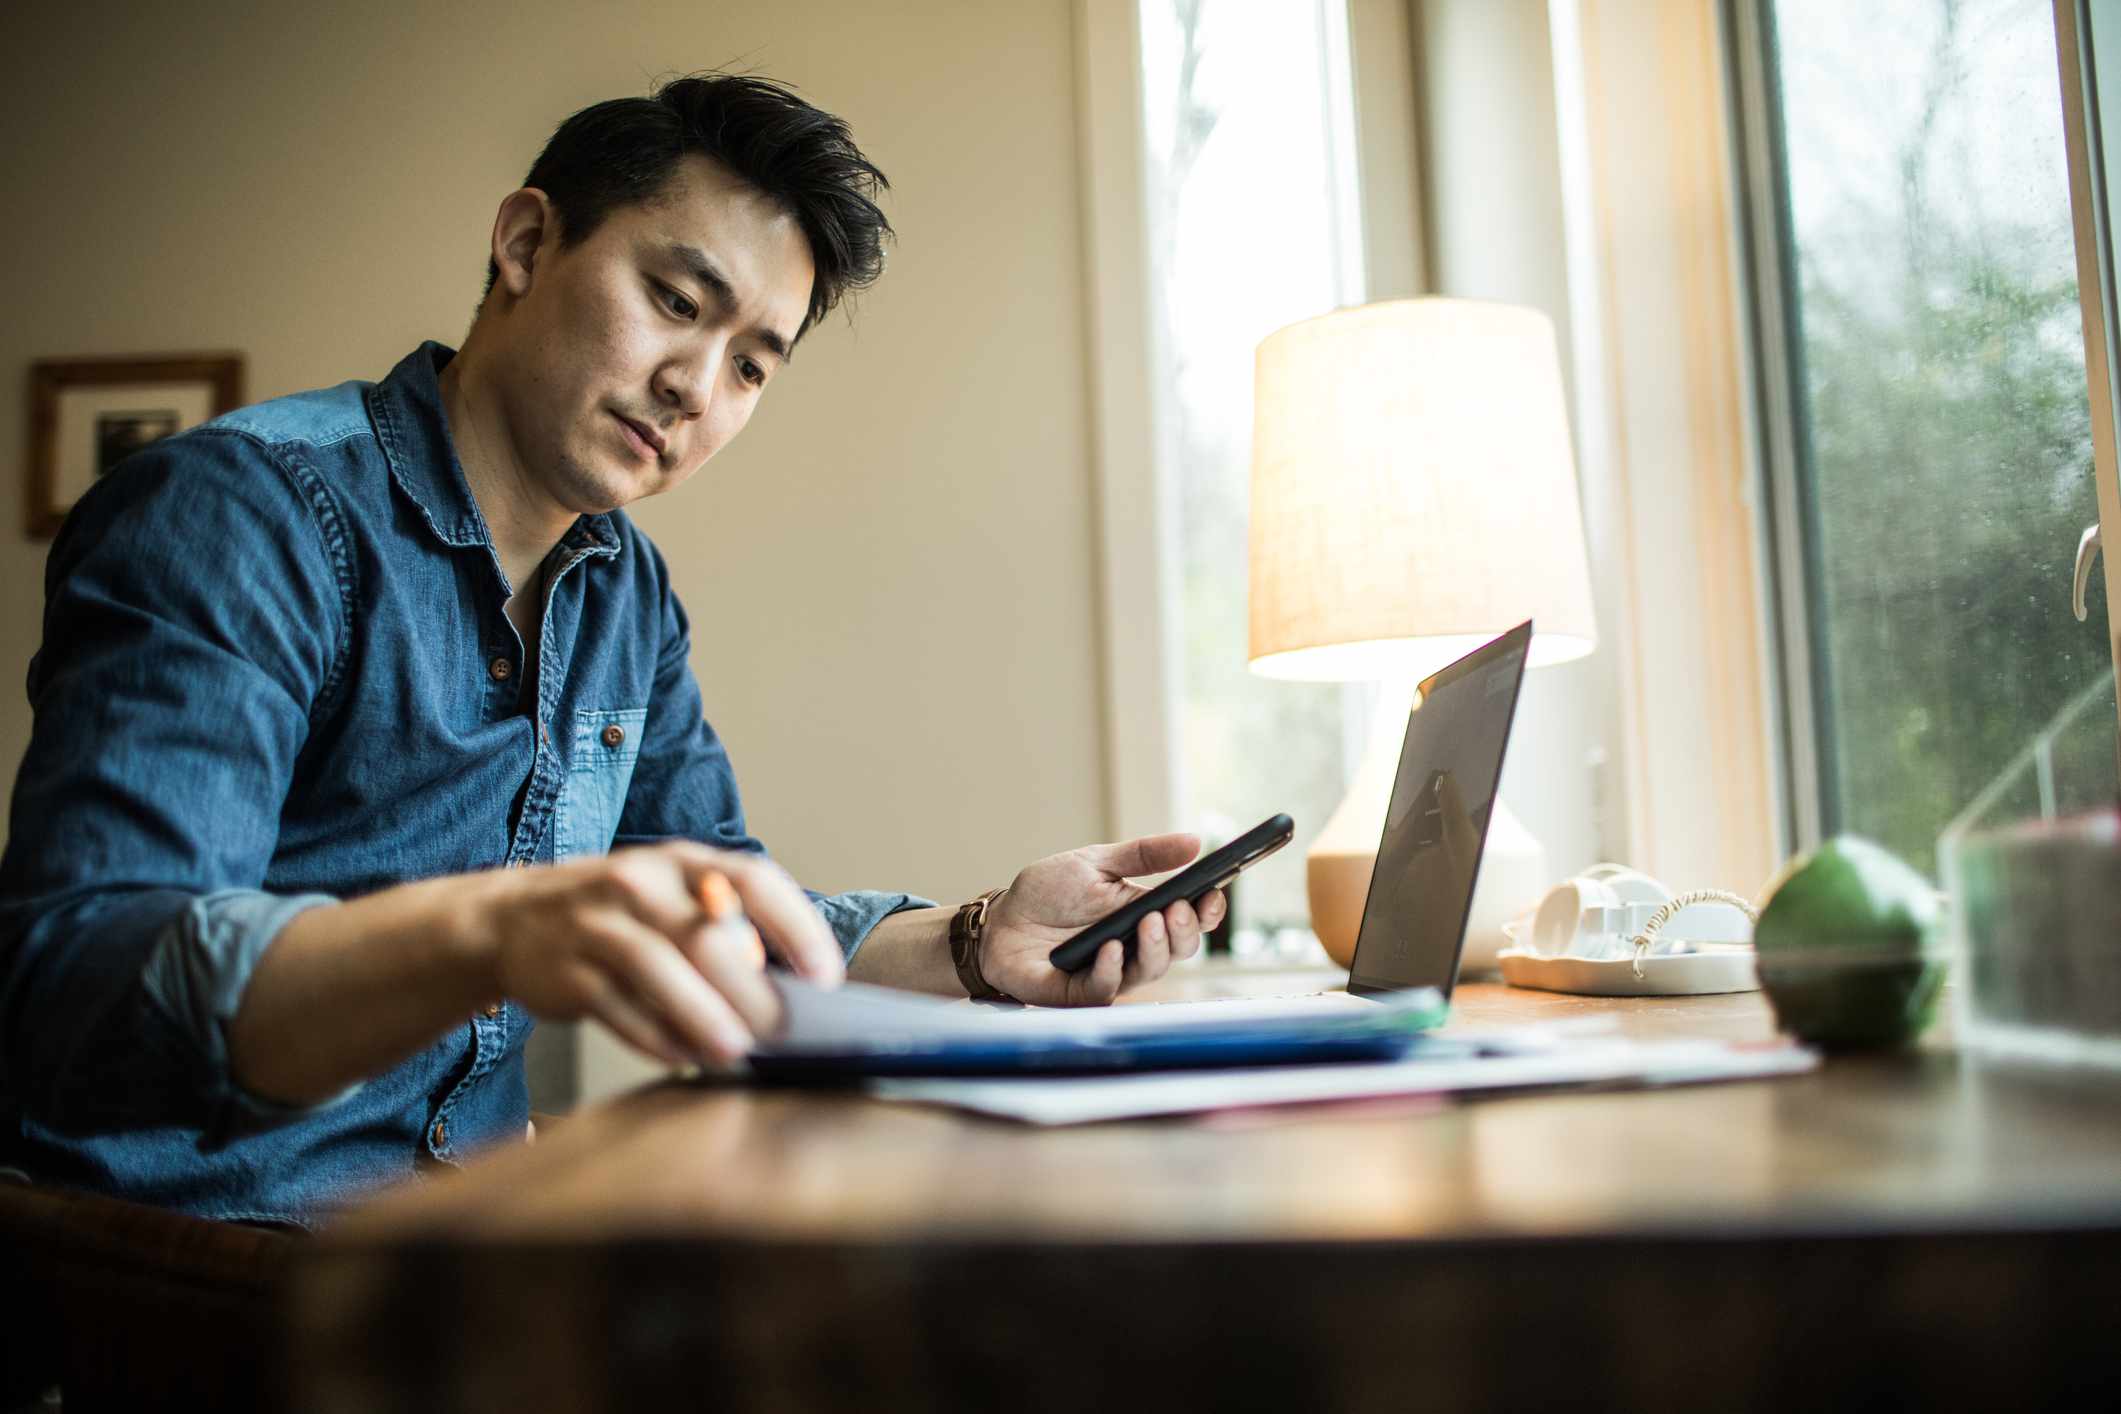 Seated man adds up Roth IRA savings with calculator and laptop